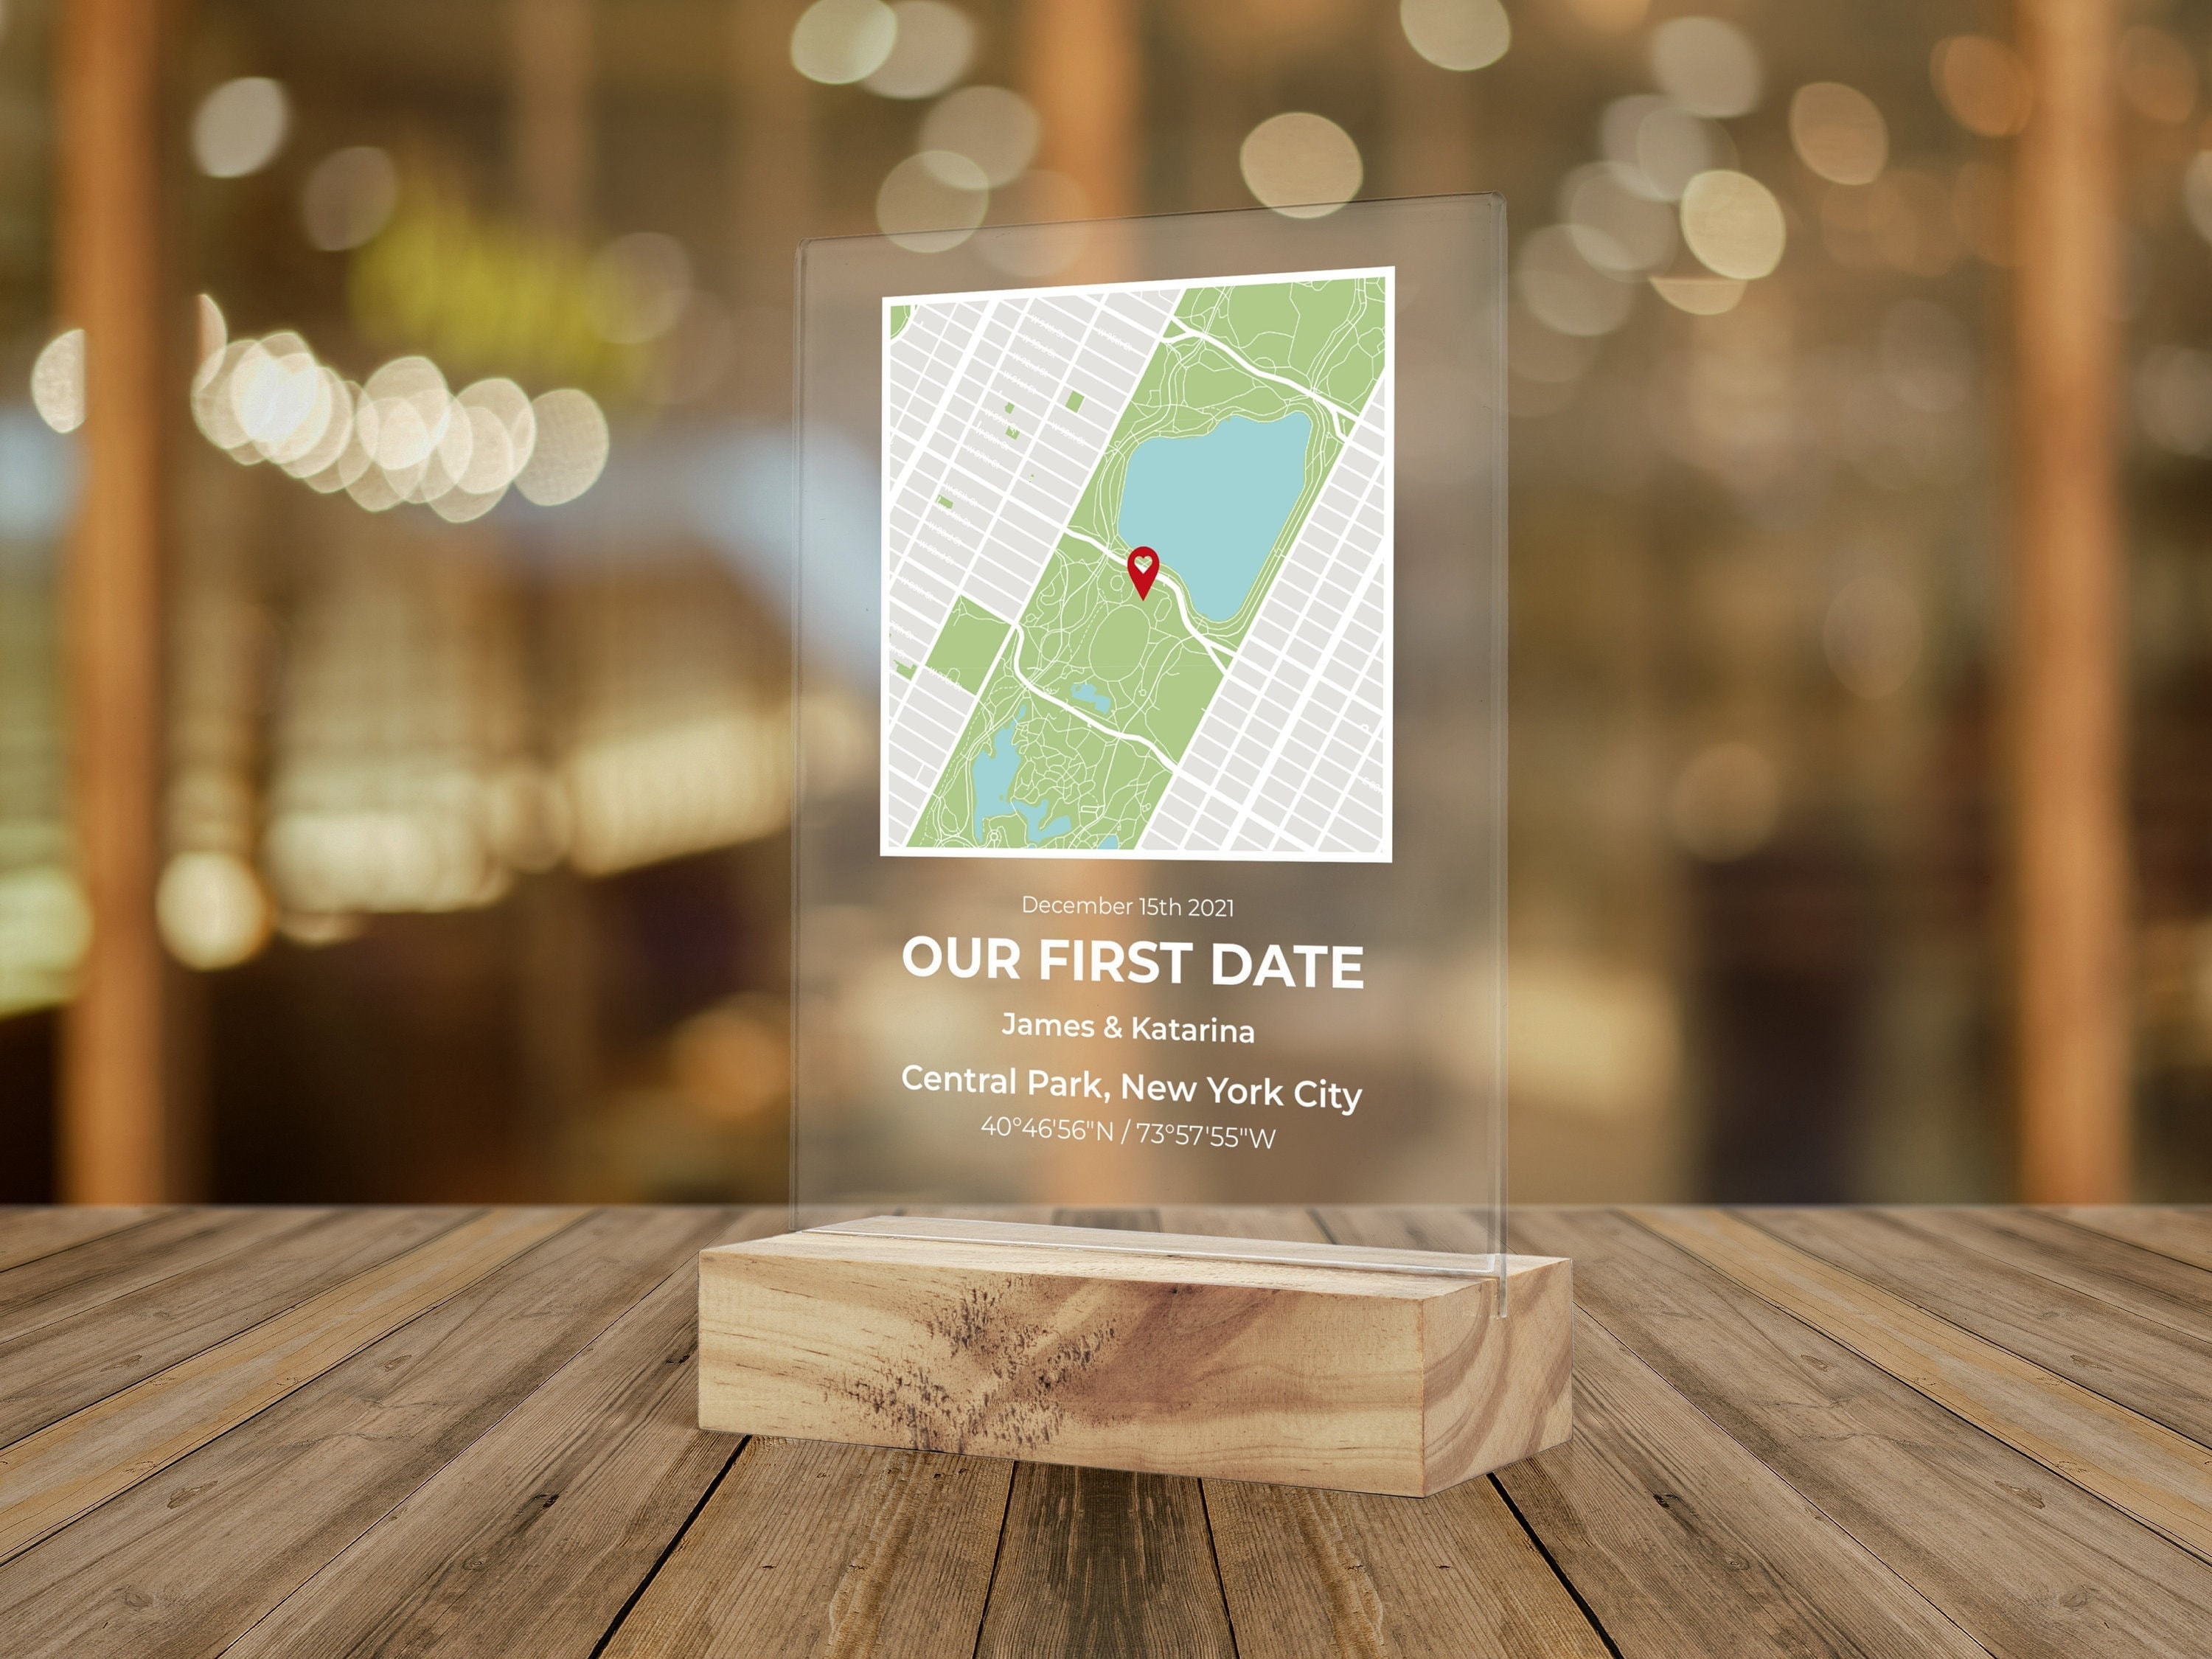 Personalized Acrylic Map, Our First Date Map, Our First Date Acrylic, the  Place We Met, Acrylic Sign Map, Our First Date Plaque Glass 